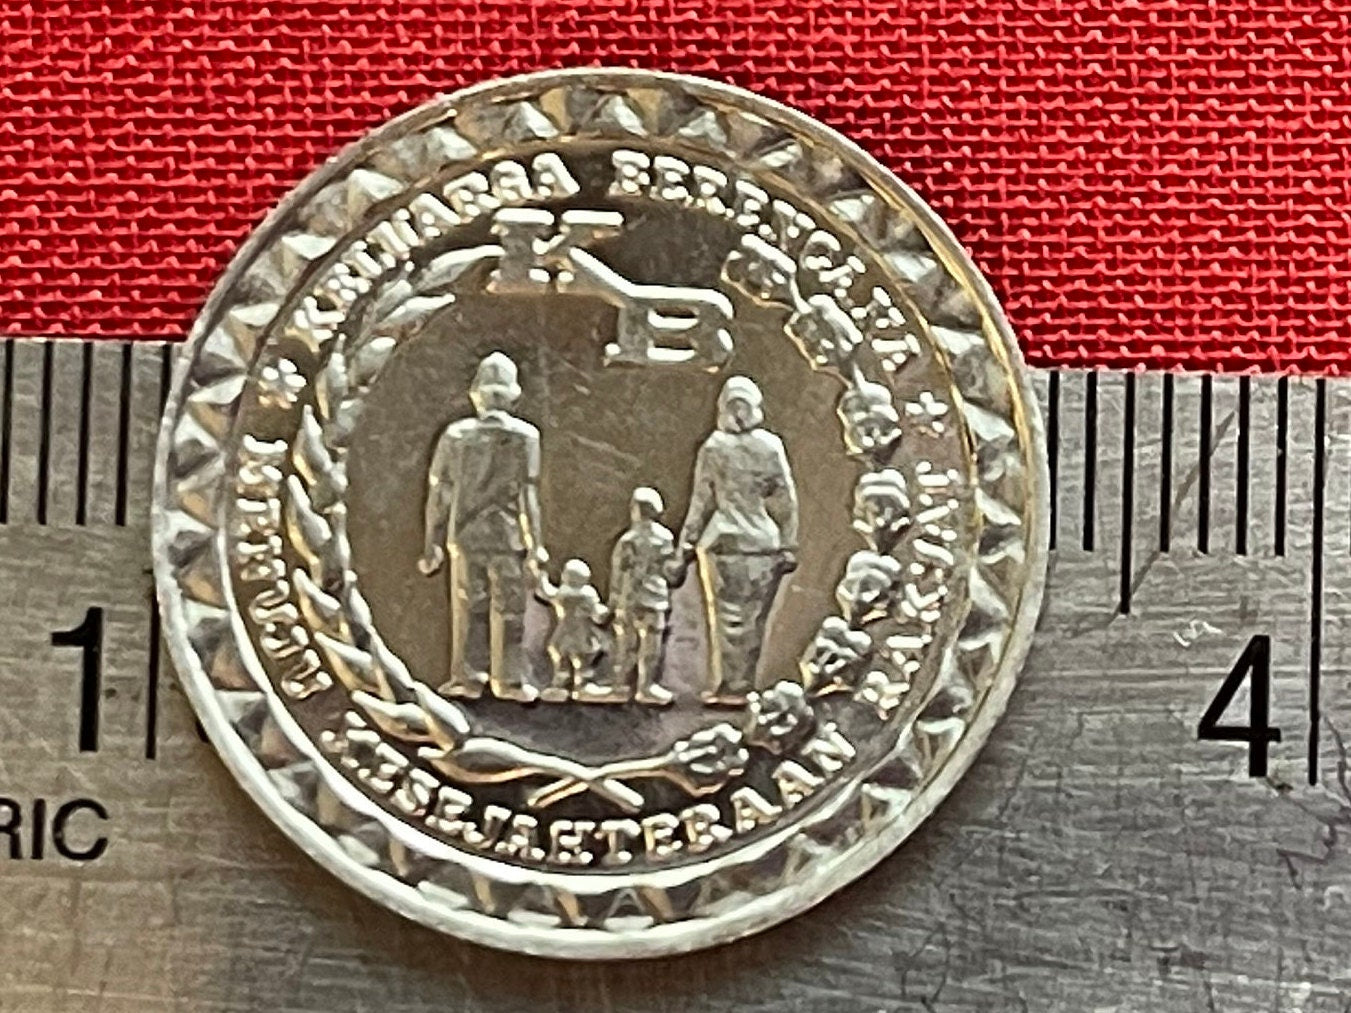 Perfect Family Two Children Are Enough Campaign 5 Rupiah Indonesia Authentic Coin Money for Jewelry and Craft Making (Family Planning)